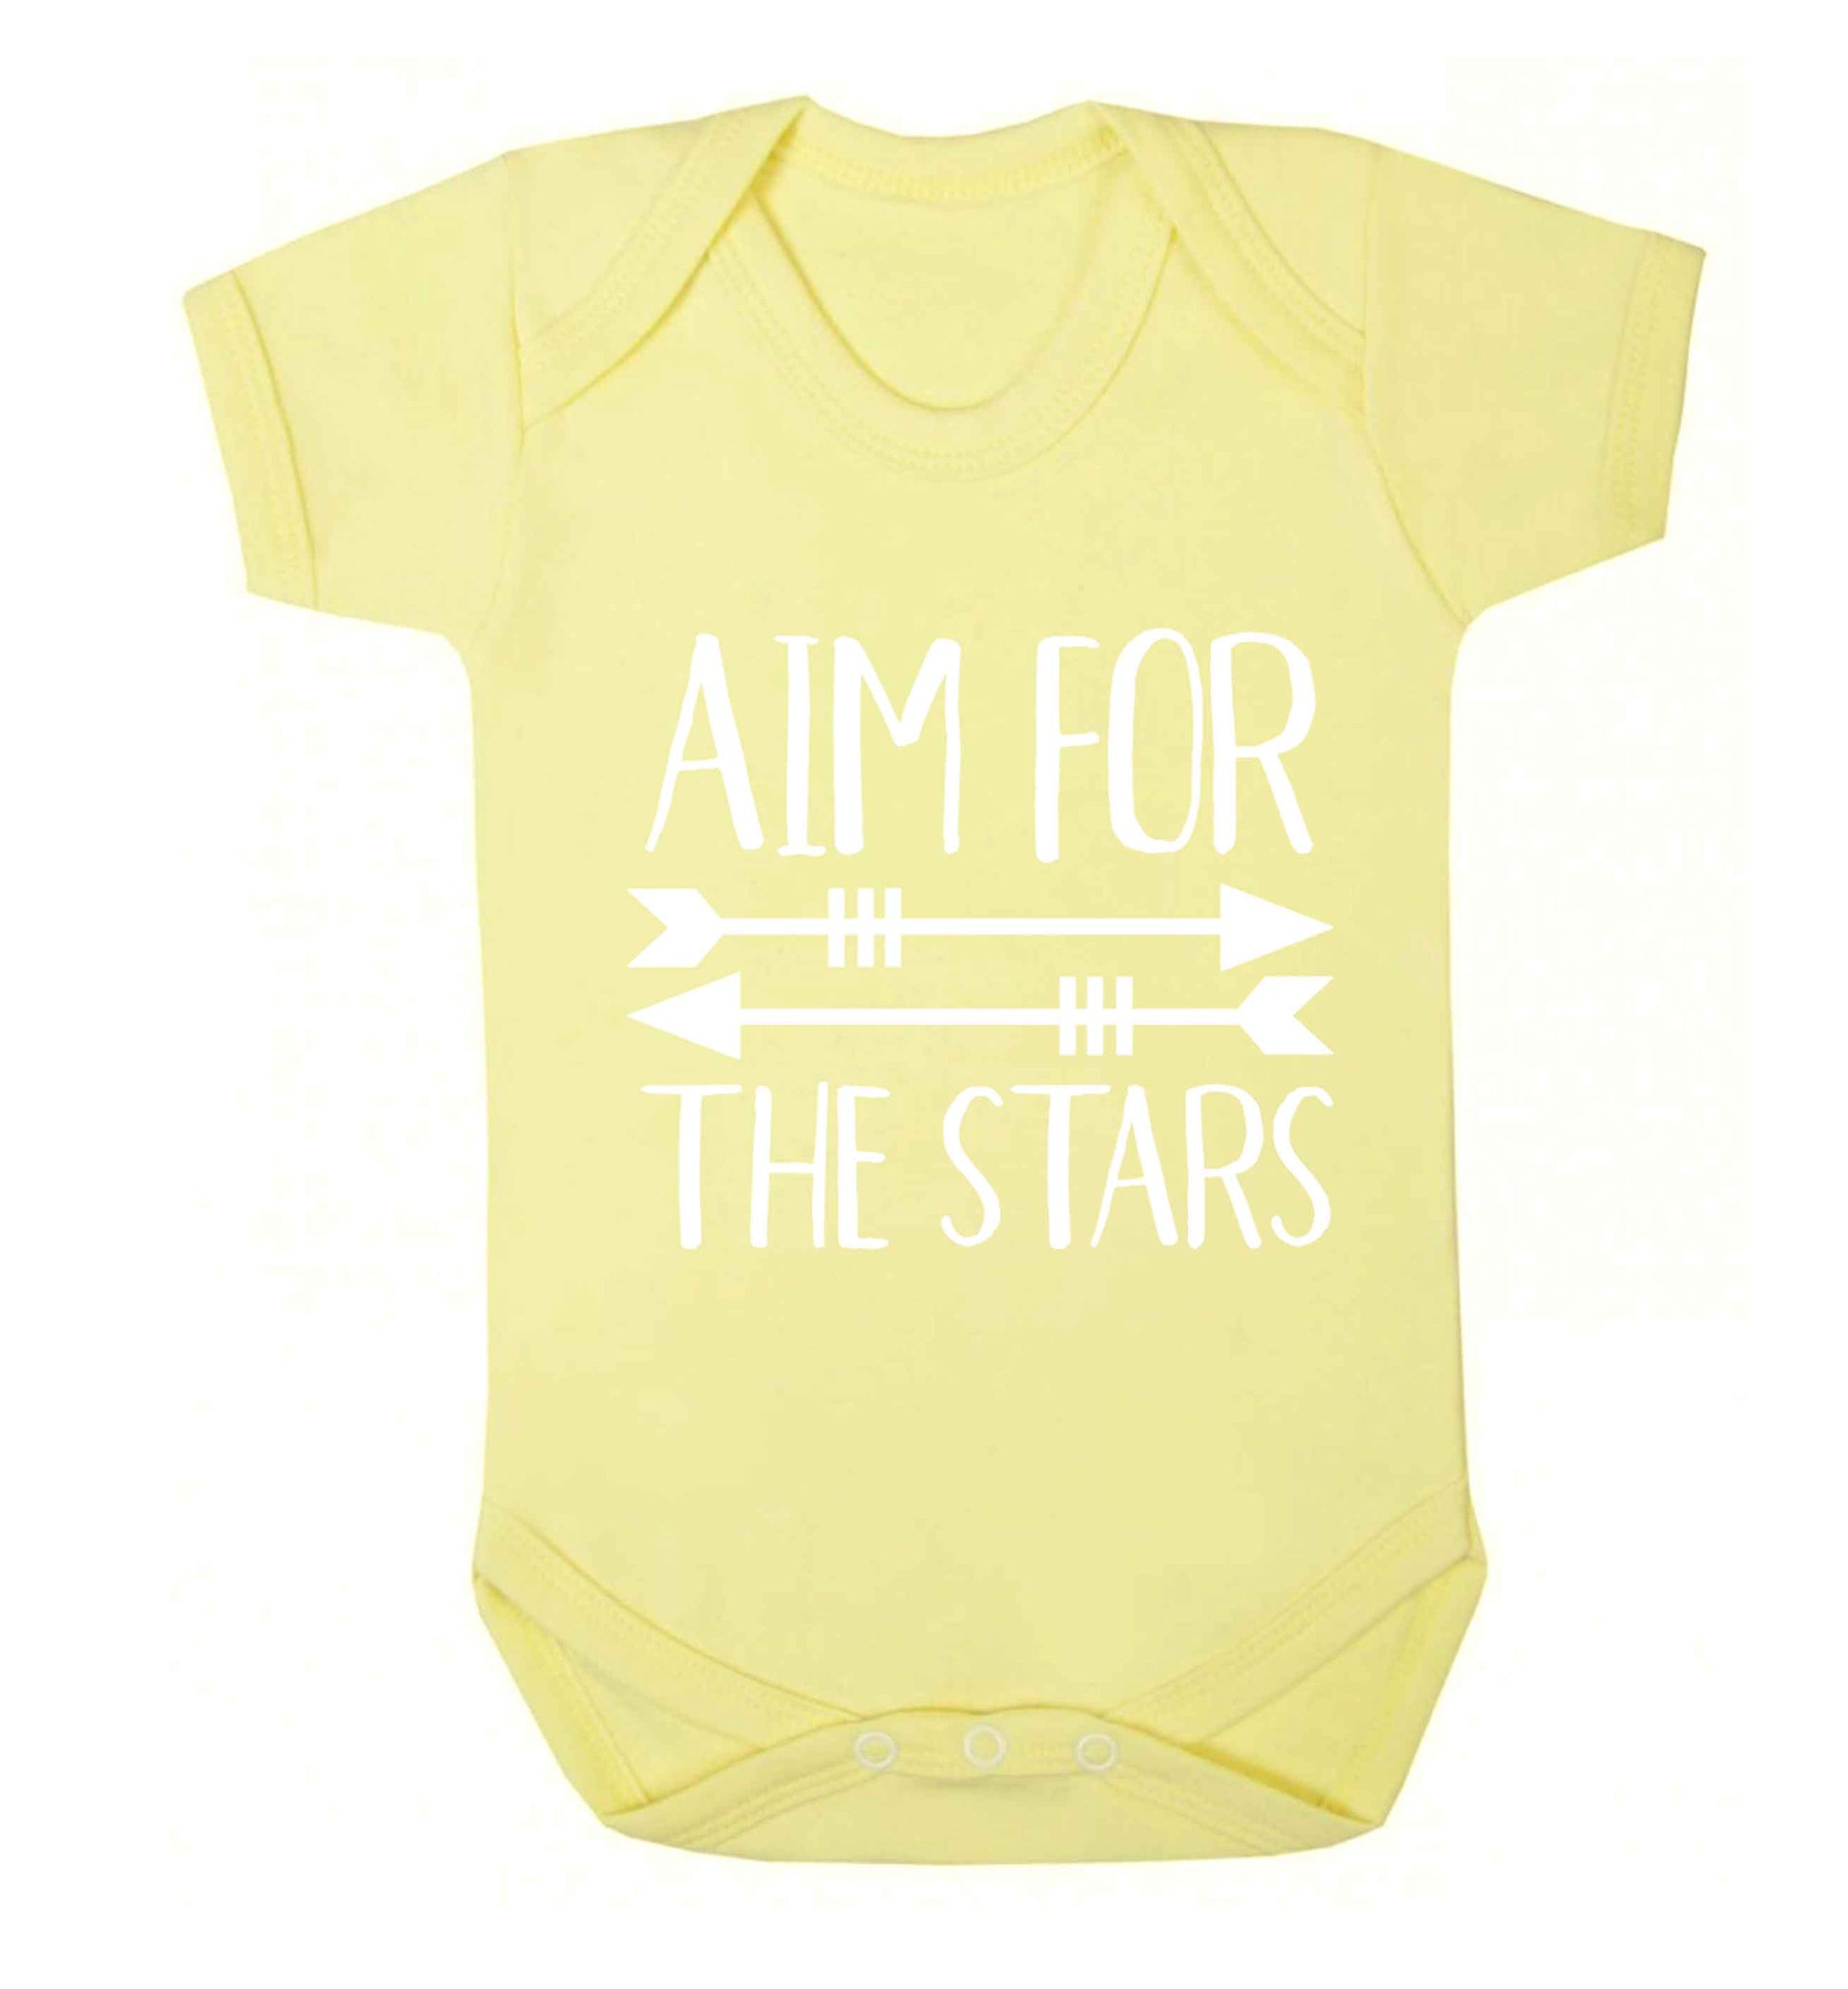 Aim for the stars Baby Vest pale yellow 18-24 months